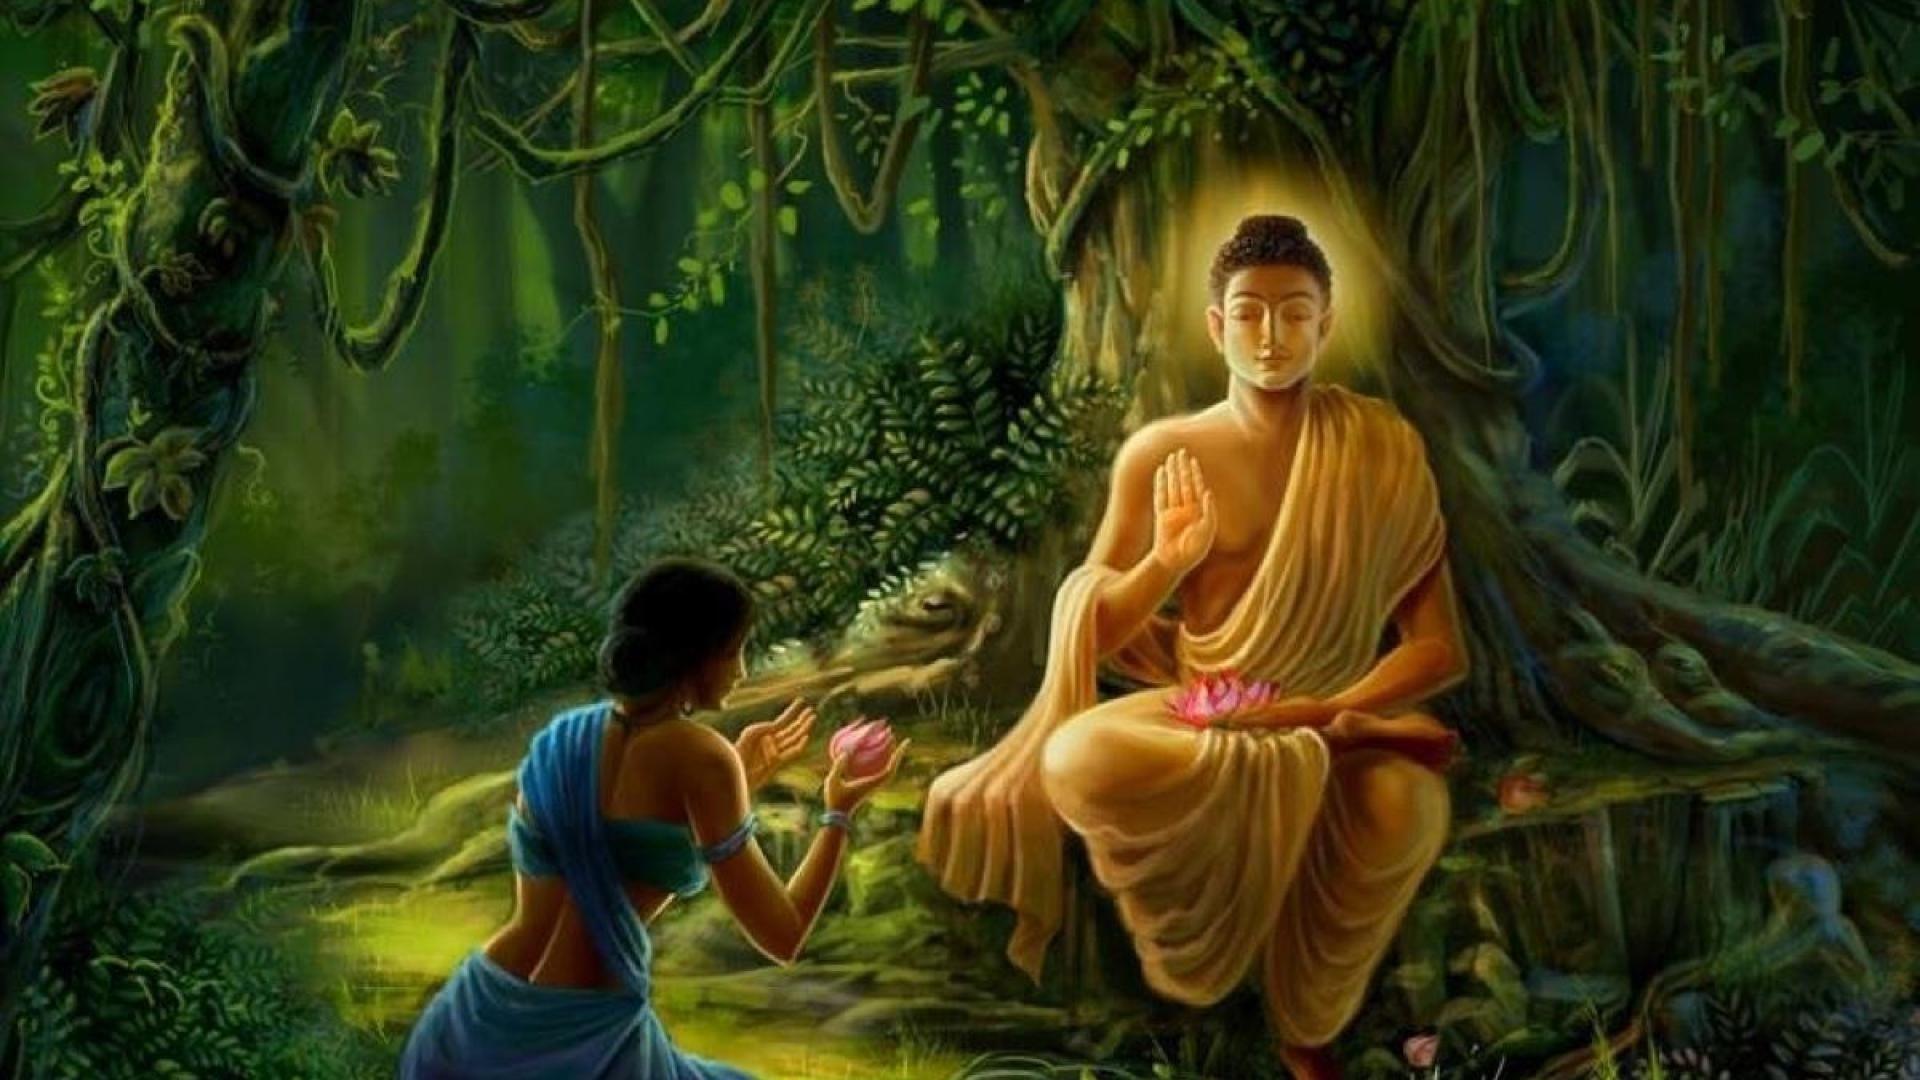 Are you trying to find Buddha Wallpaper Widescreen Hd? Right